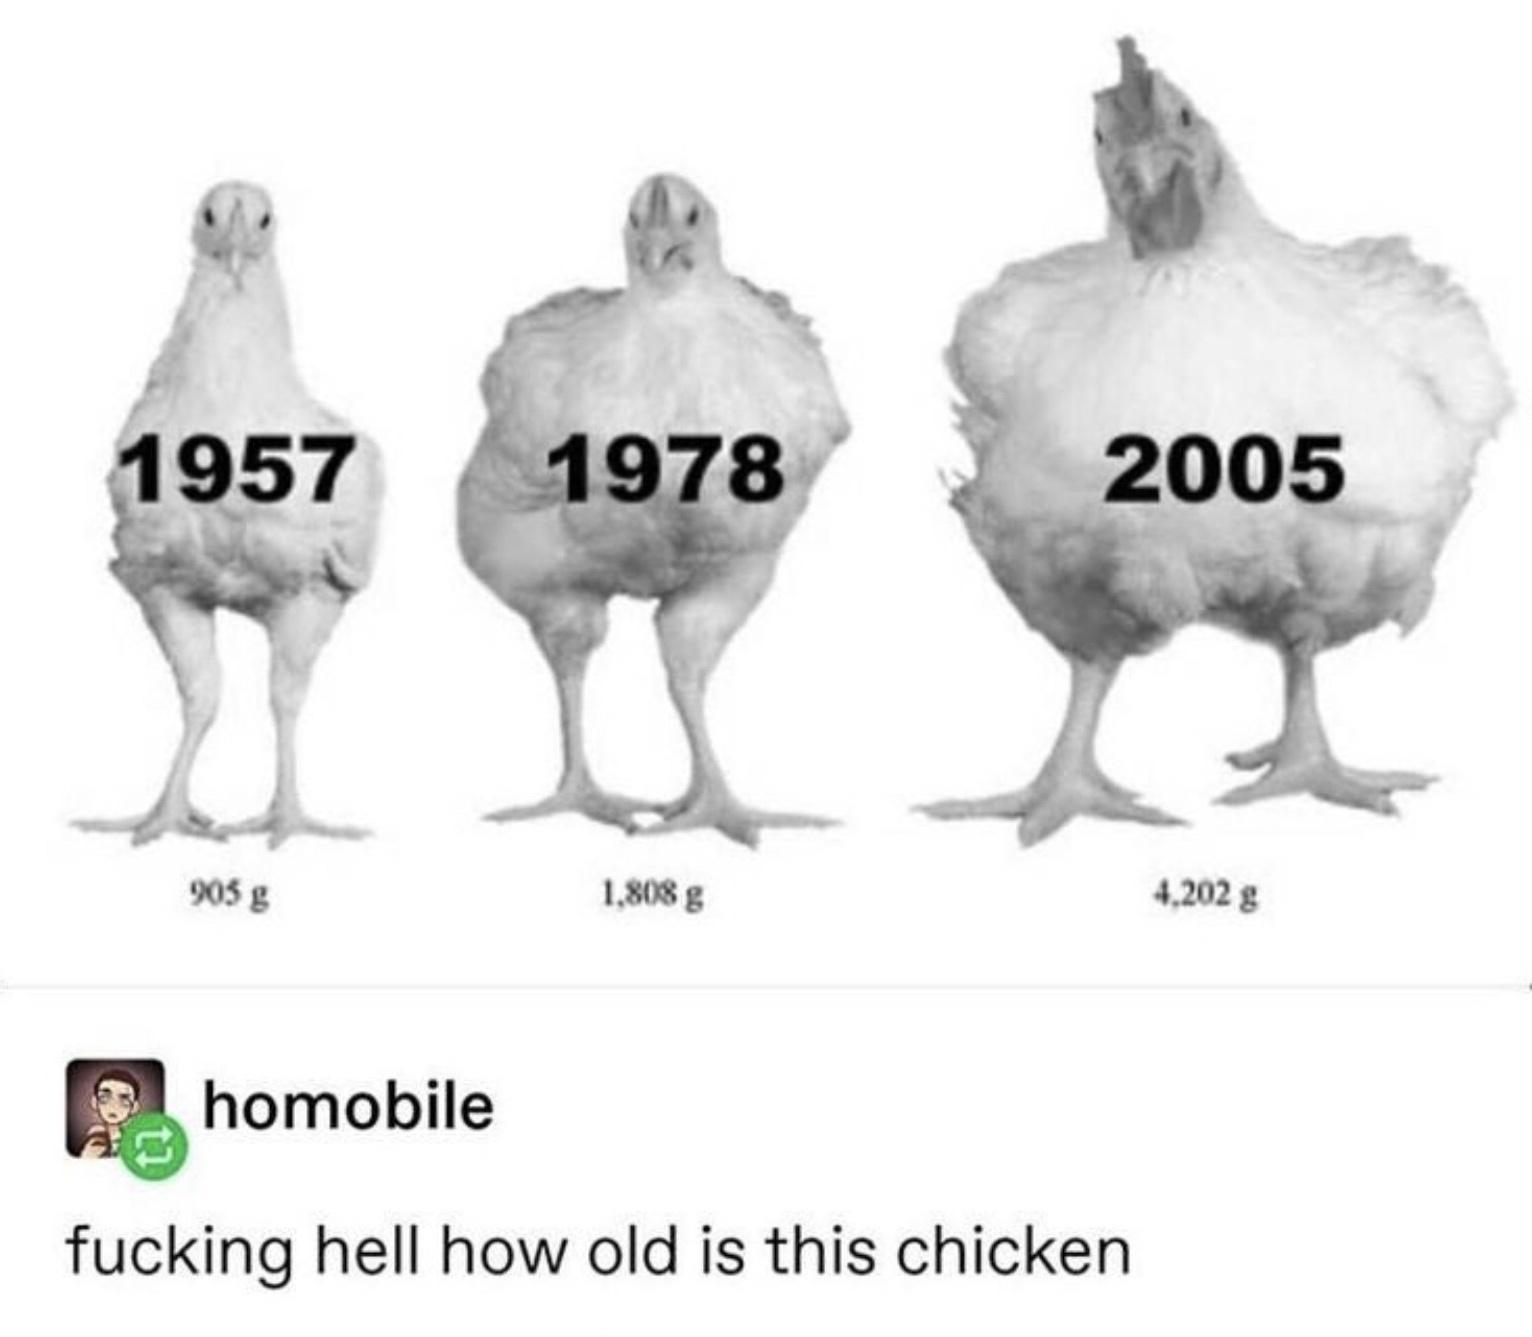 chicken growth - 1957 1978 2005 905 g 1.808 g 4,202 g homobile fucking hell how old is this chicken